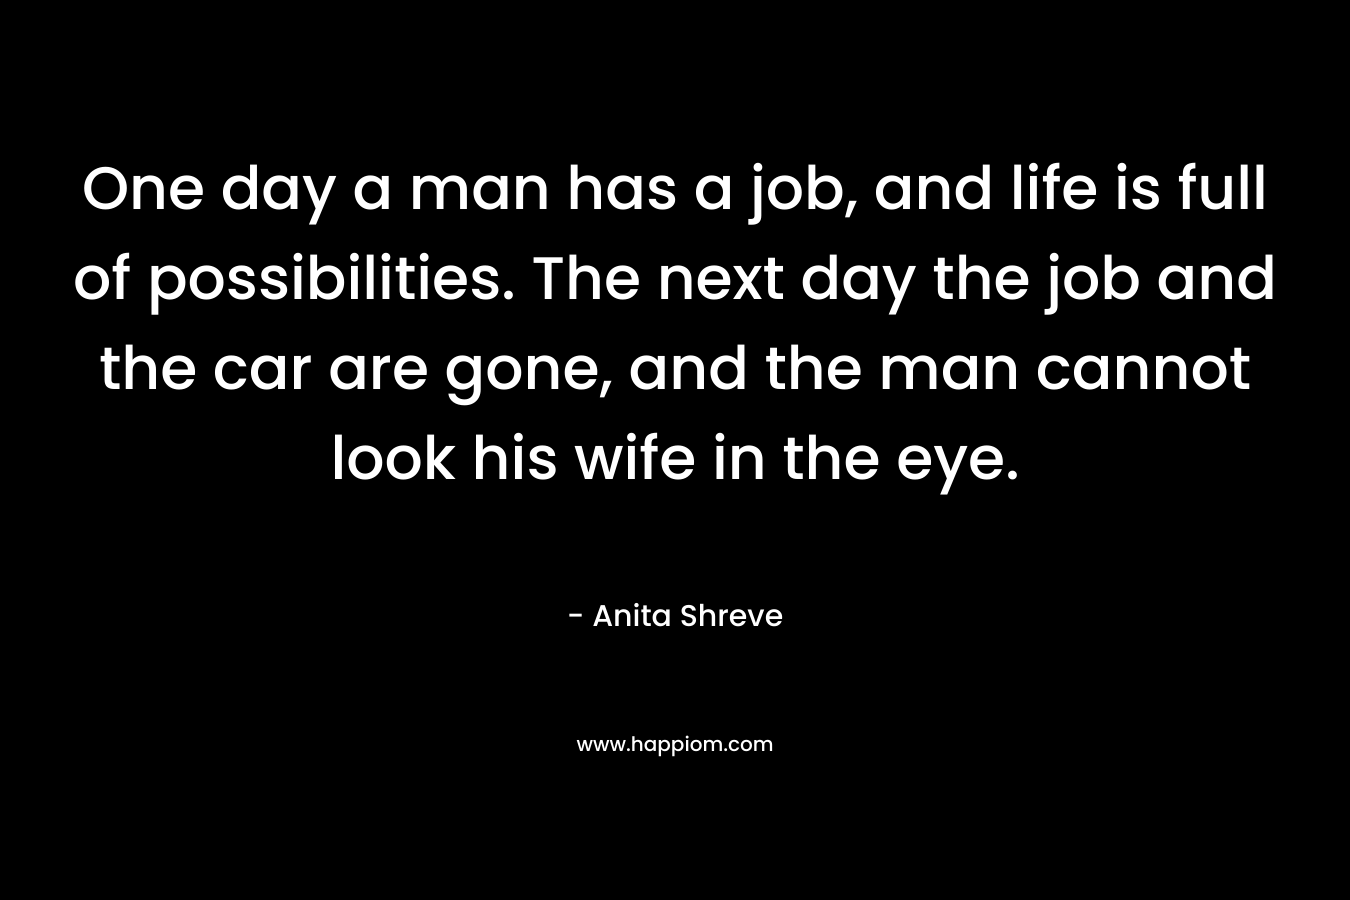 One day a man has a job, and life is full of possibilities. The next day the job and the car are gone, and the man cannot look his wife in the eye.